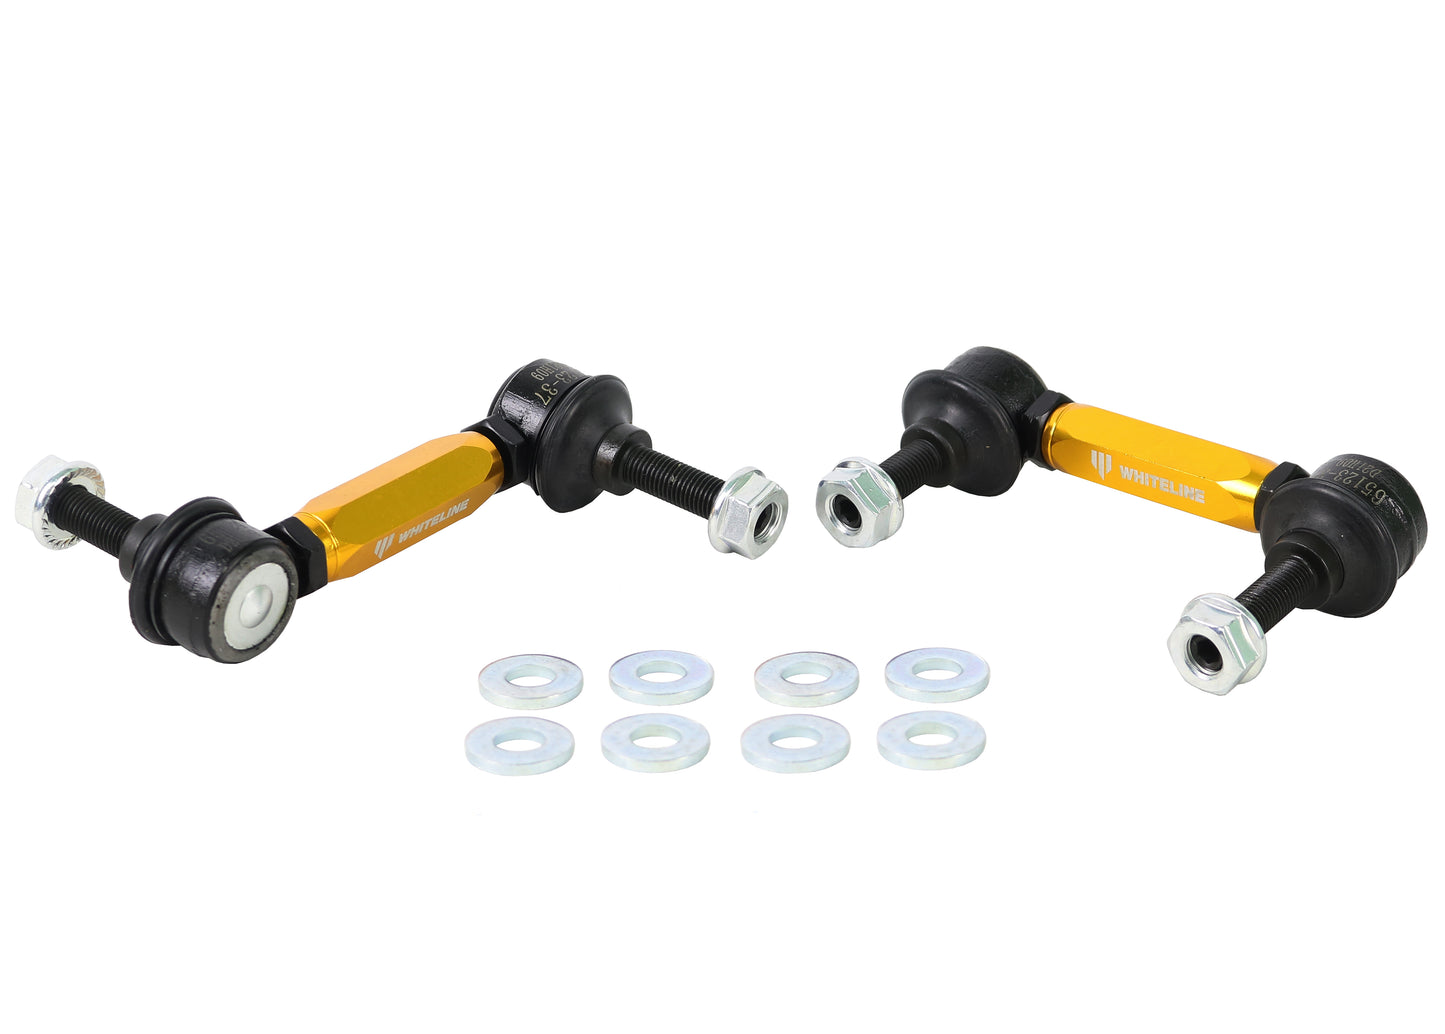 Whiteline Adjustable Rear Anti Roll Bar Drop Links for Audi A3 (8P) FWD (03-13)